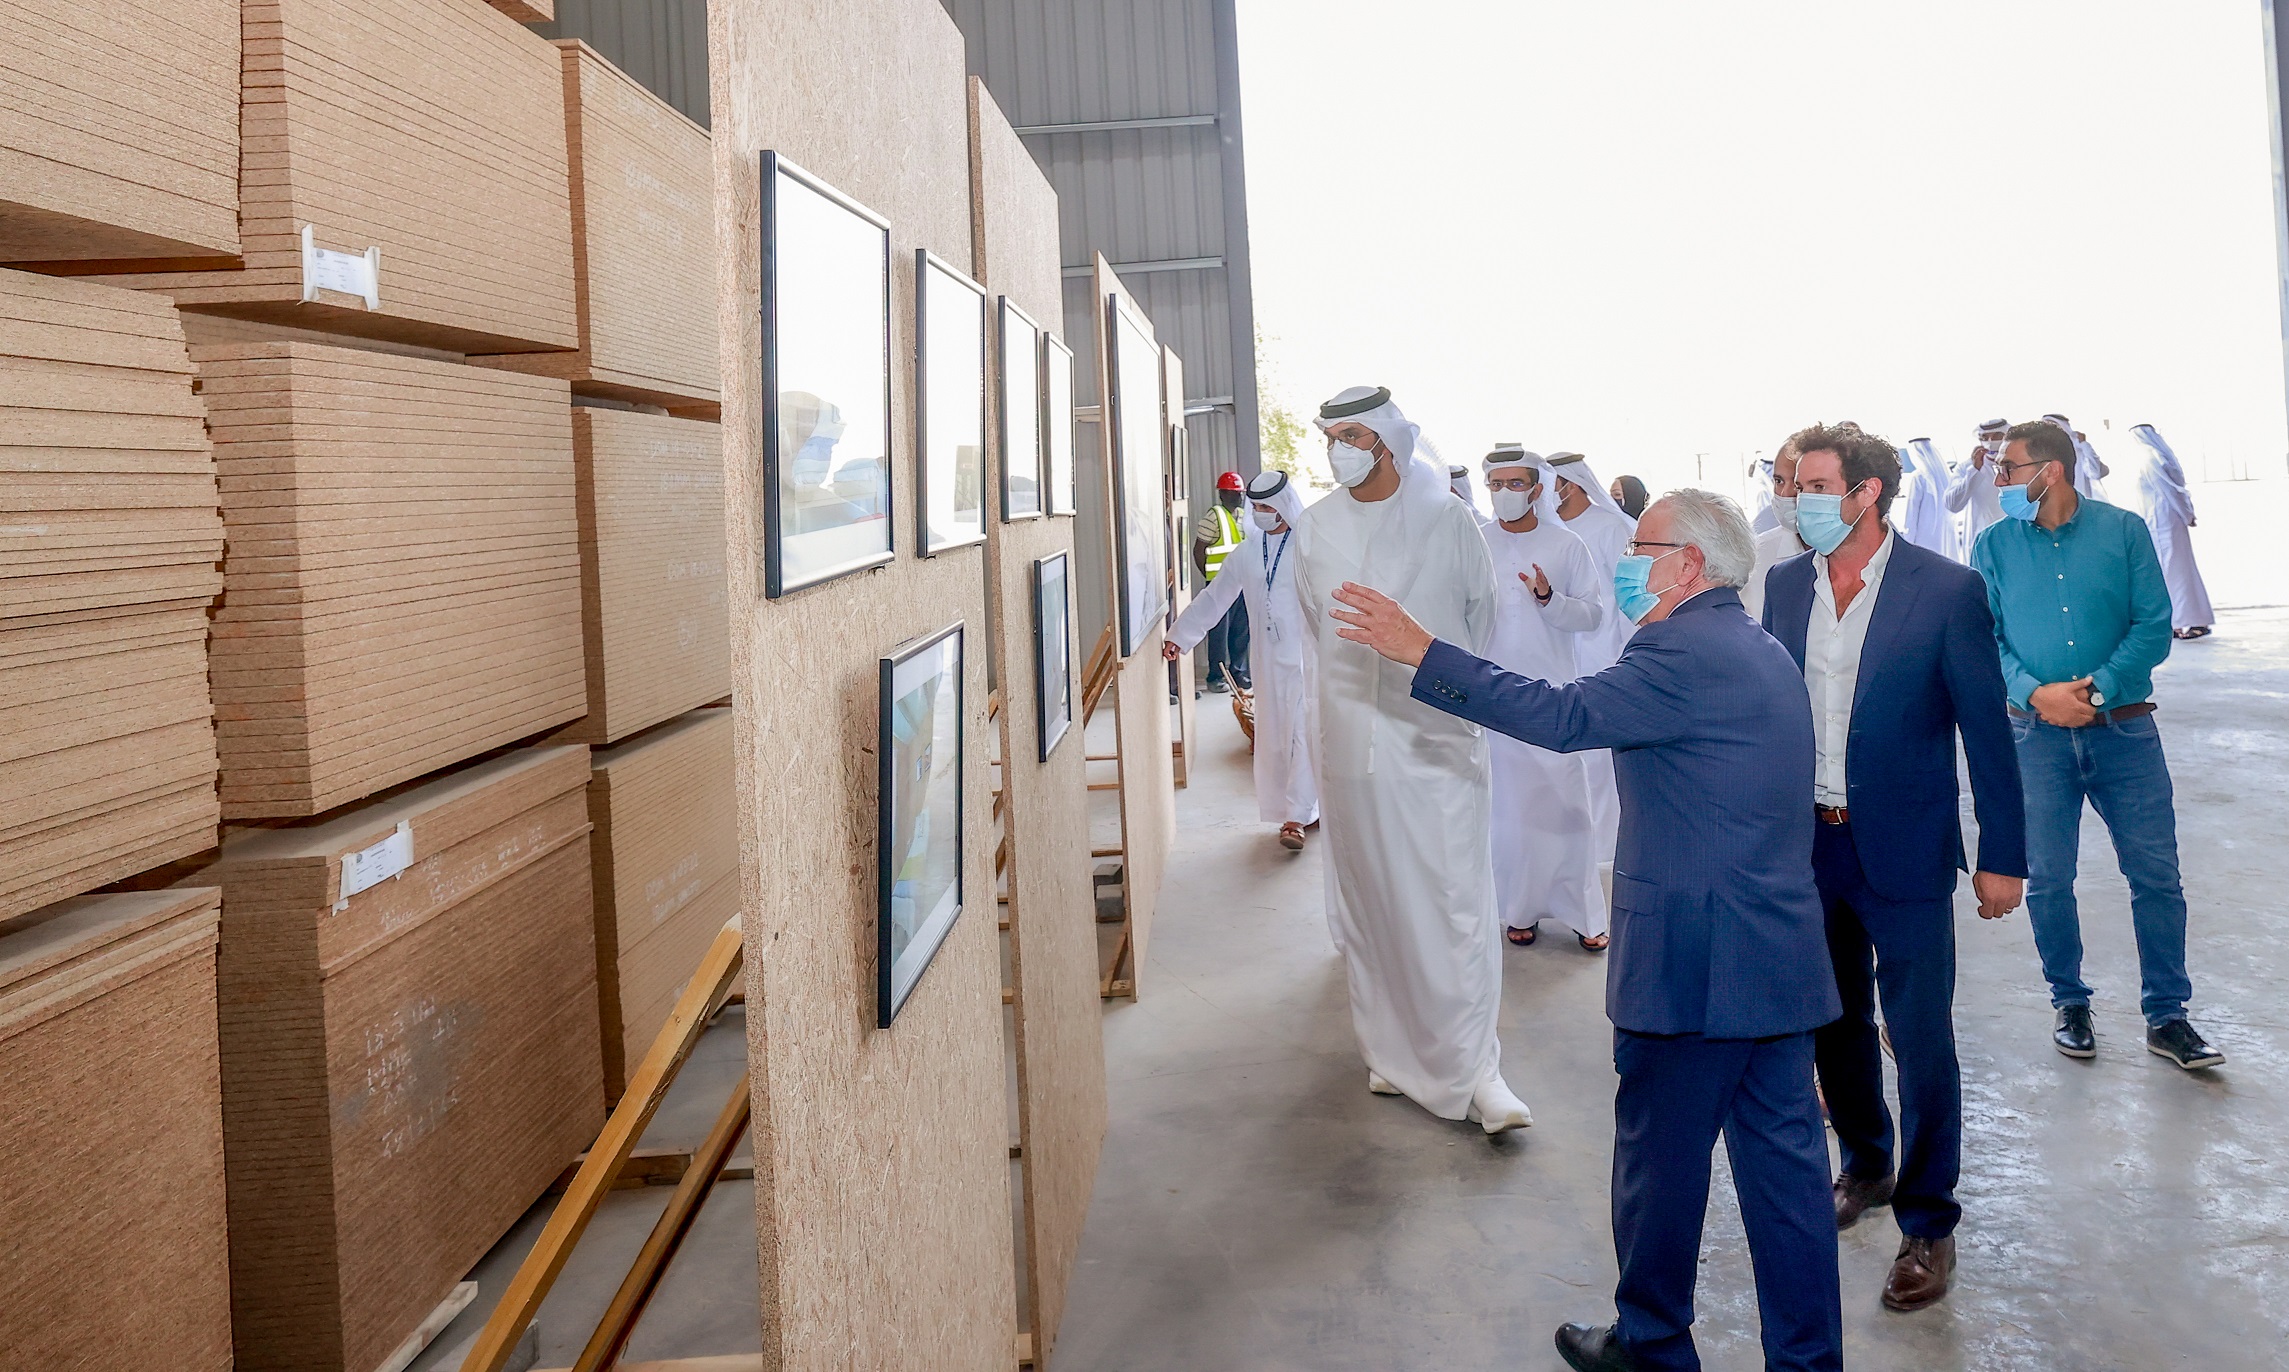 Minister of Industry and Advanced Technology underlines UAE’s attraction as global industrial hub during visit to KIZAD